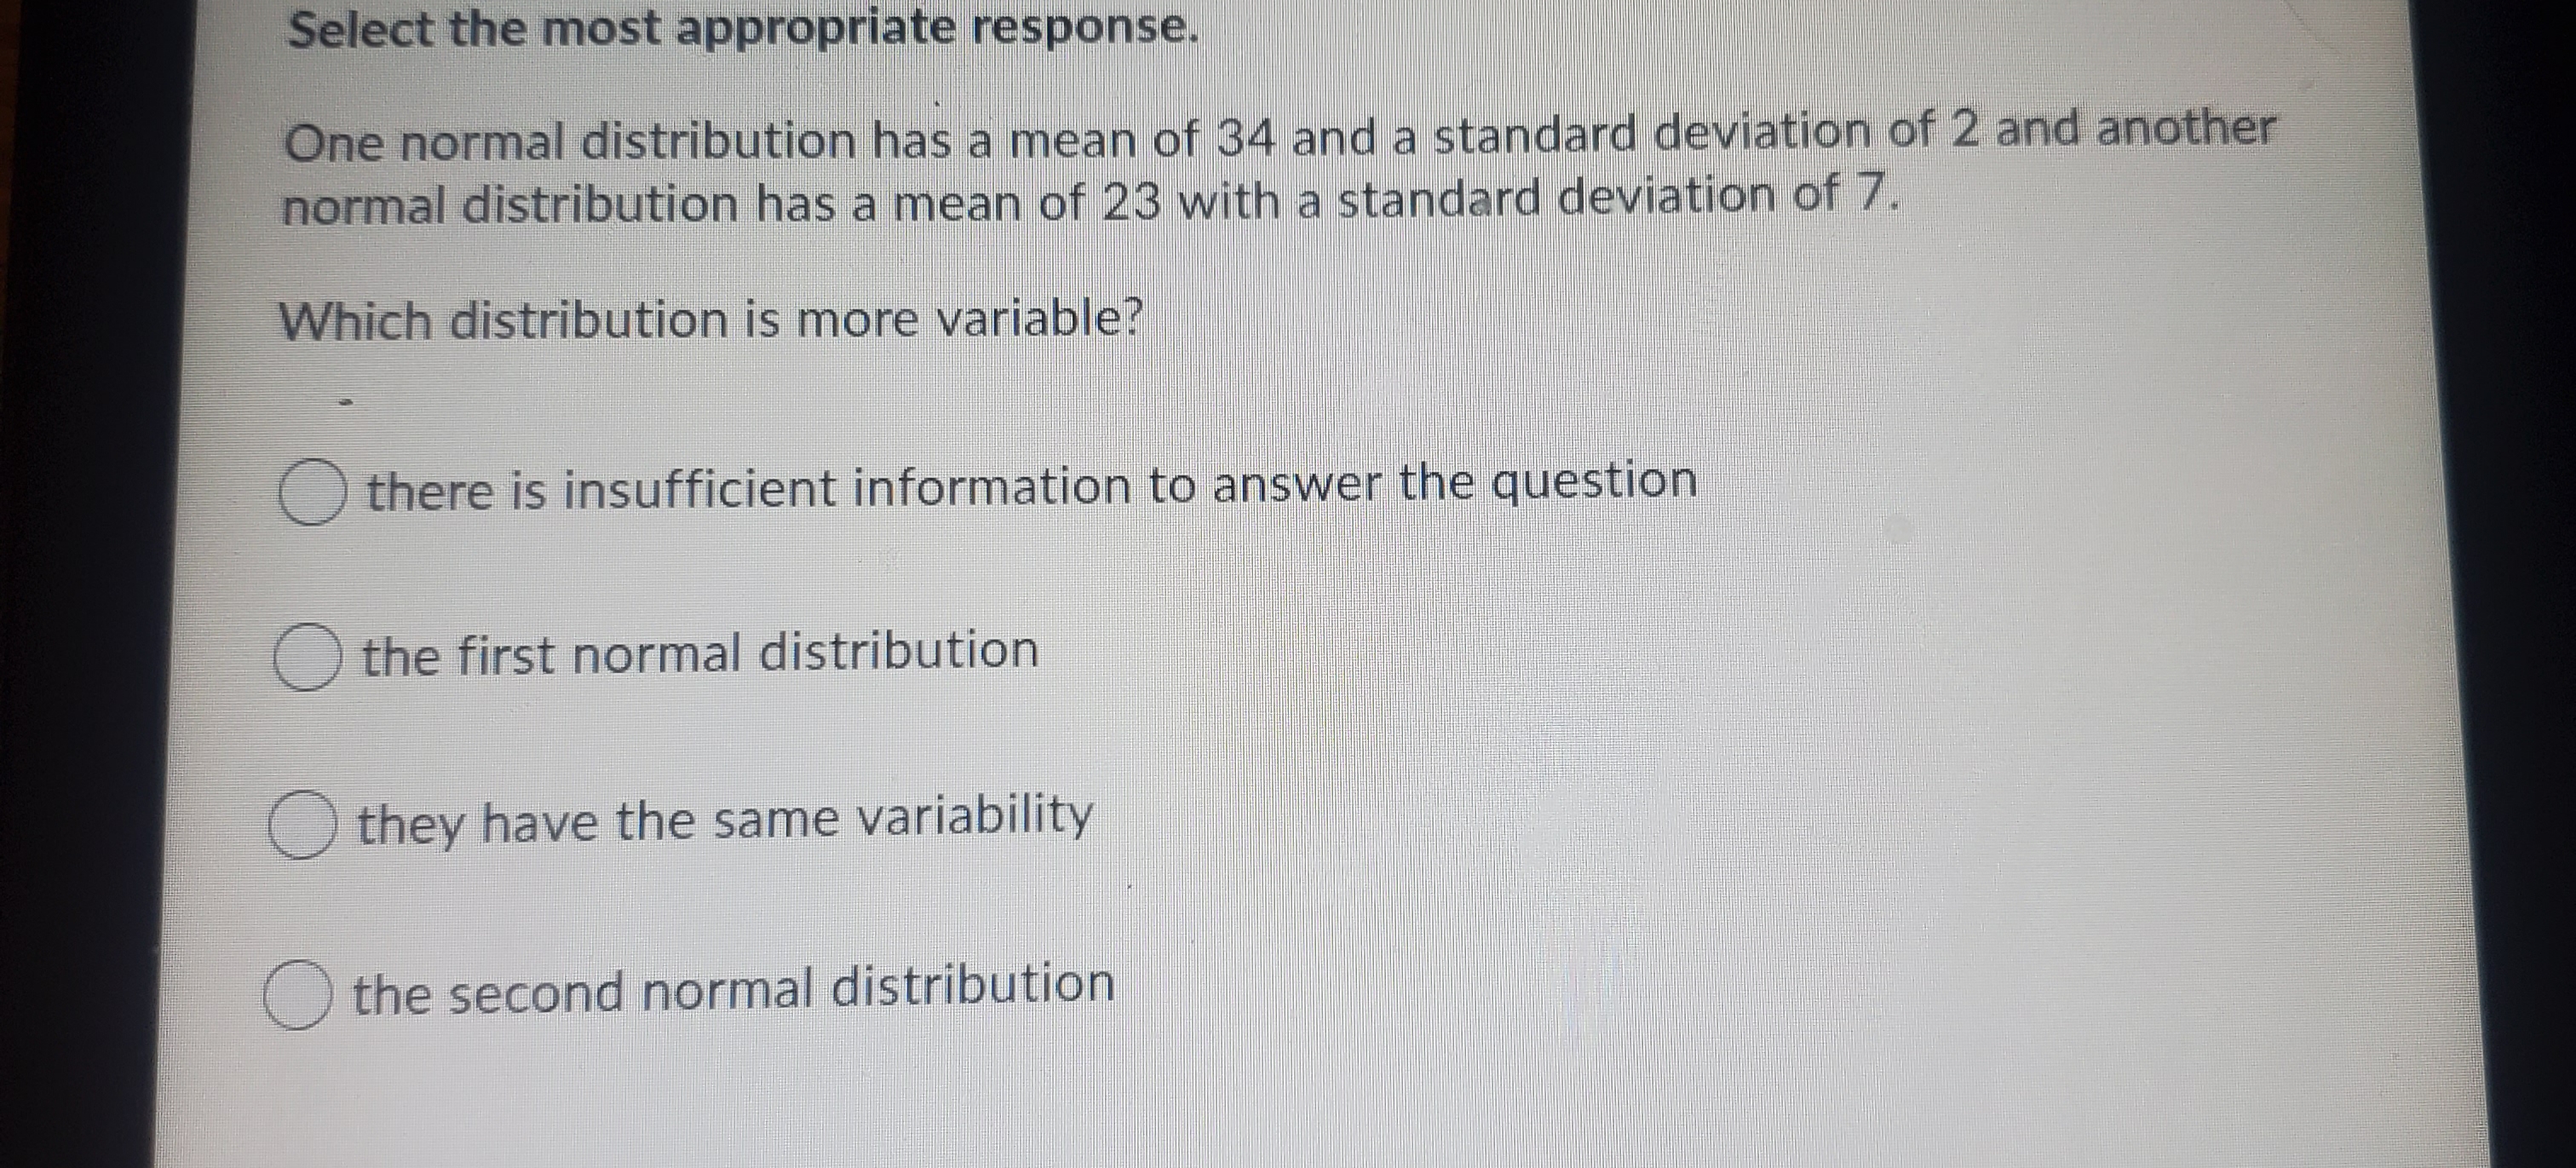 Select the most appropriate response.
One normal distribution has a mean of 34 and a standard deviation of 2 and another
normal distribution has a mean of 23 with a standard deviation of 7.
Which distribution is more variable?
O there is insufficient information to answer the question
the first normal distribution
they have the same variability
O the second normal distribution
